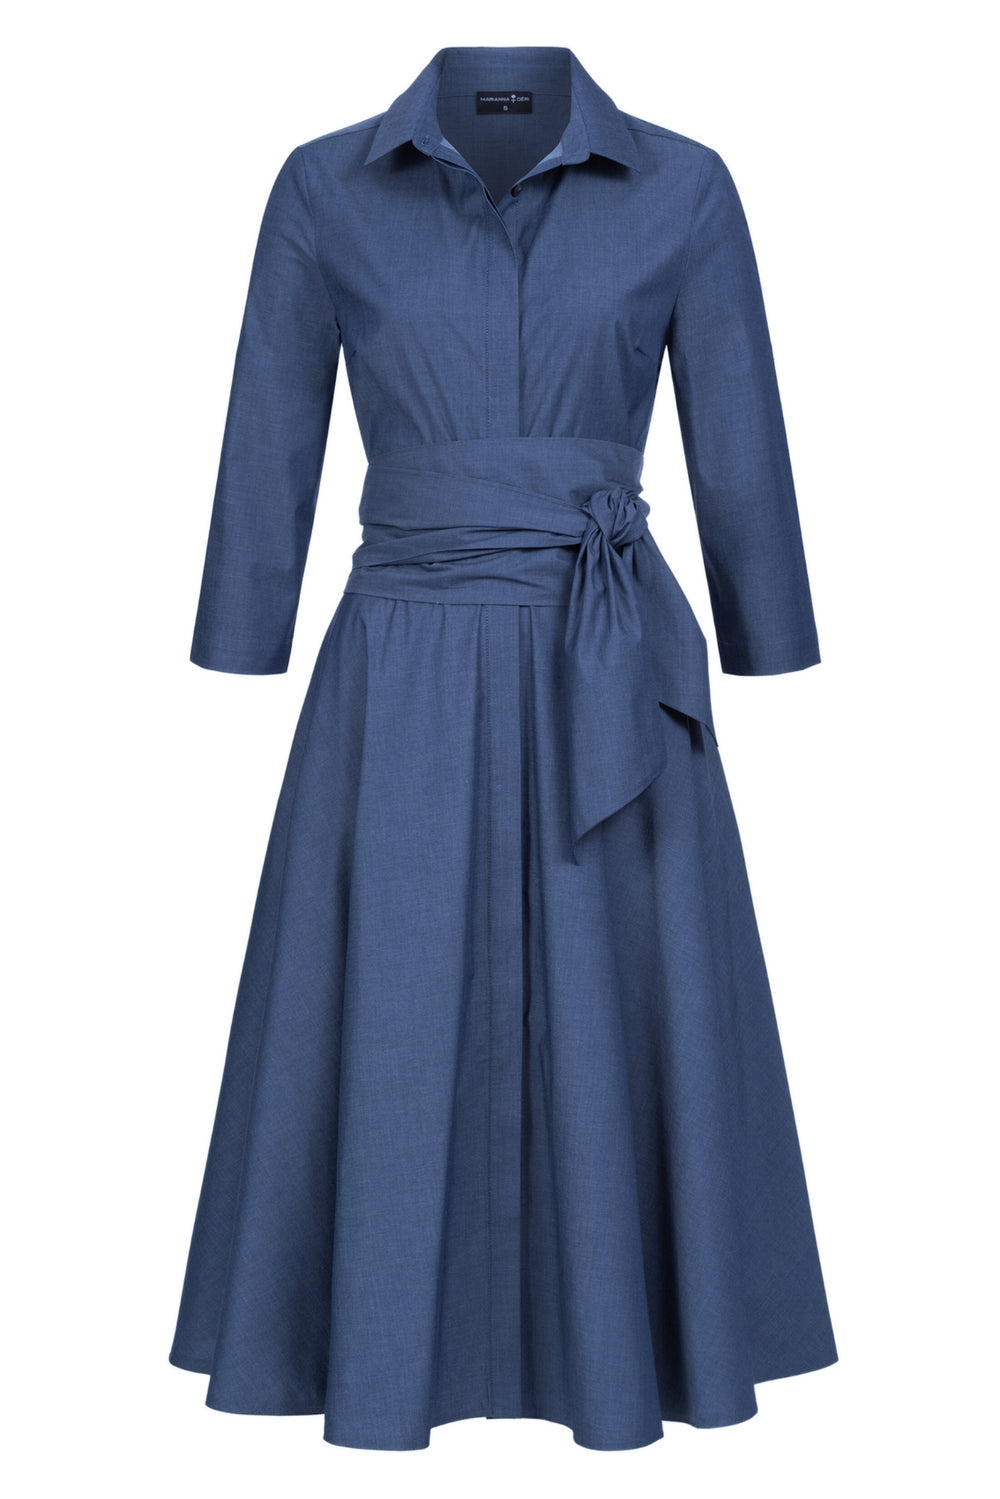 MARIANNA DÉRI | jeans blue shirt dress in midi length with tie belt